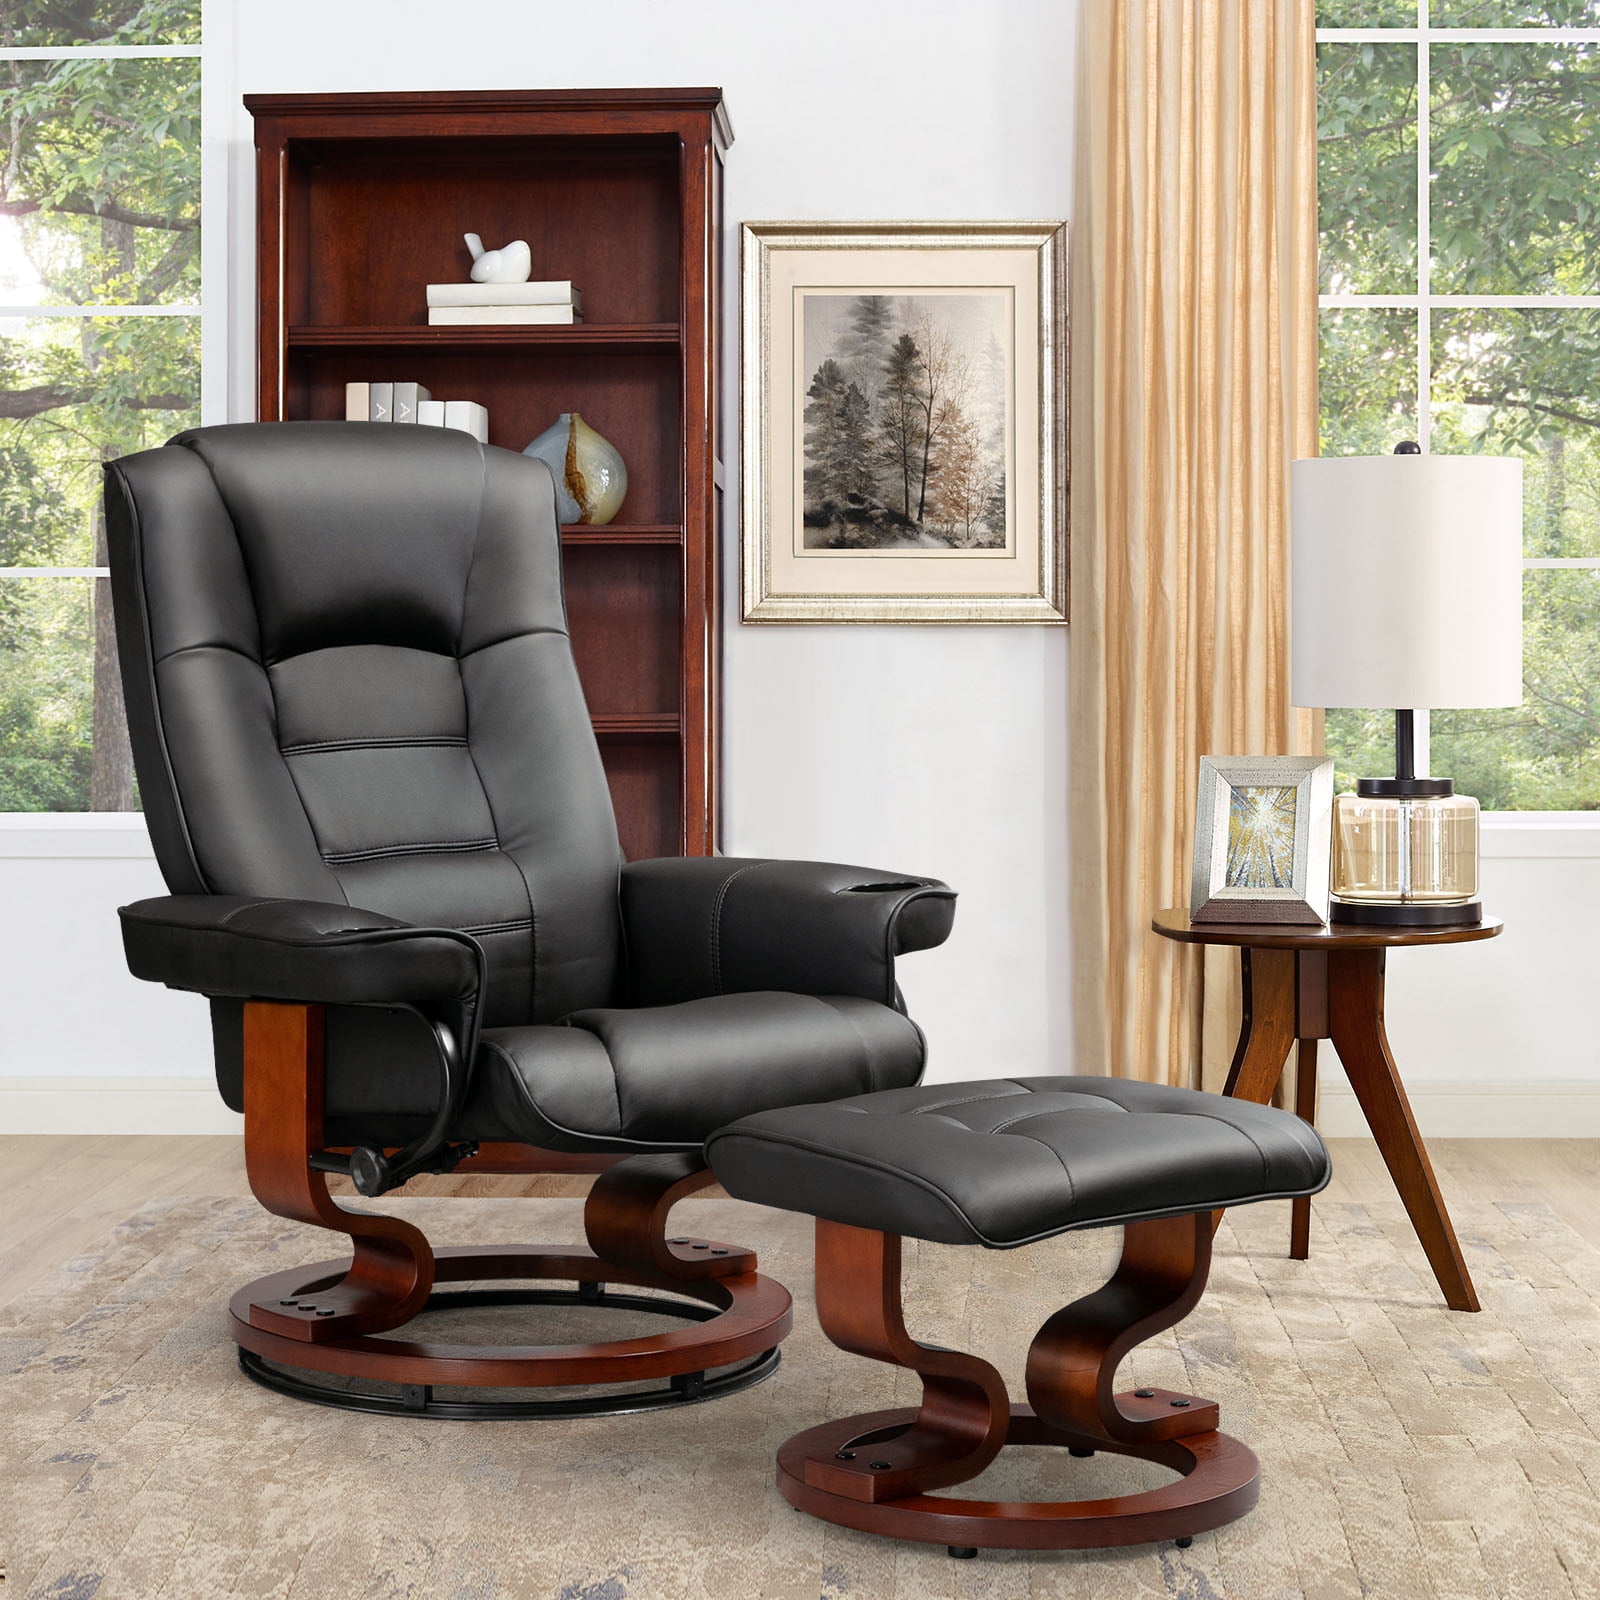 AVAWING Reclining Chair with Ottoman - Faux Leather, Swivel Design ...